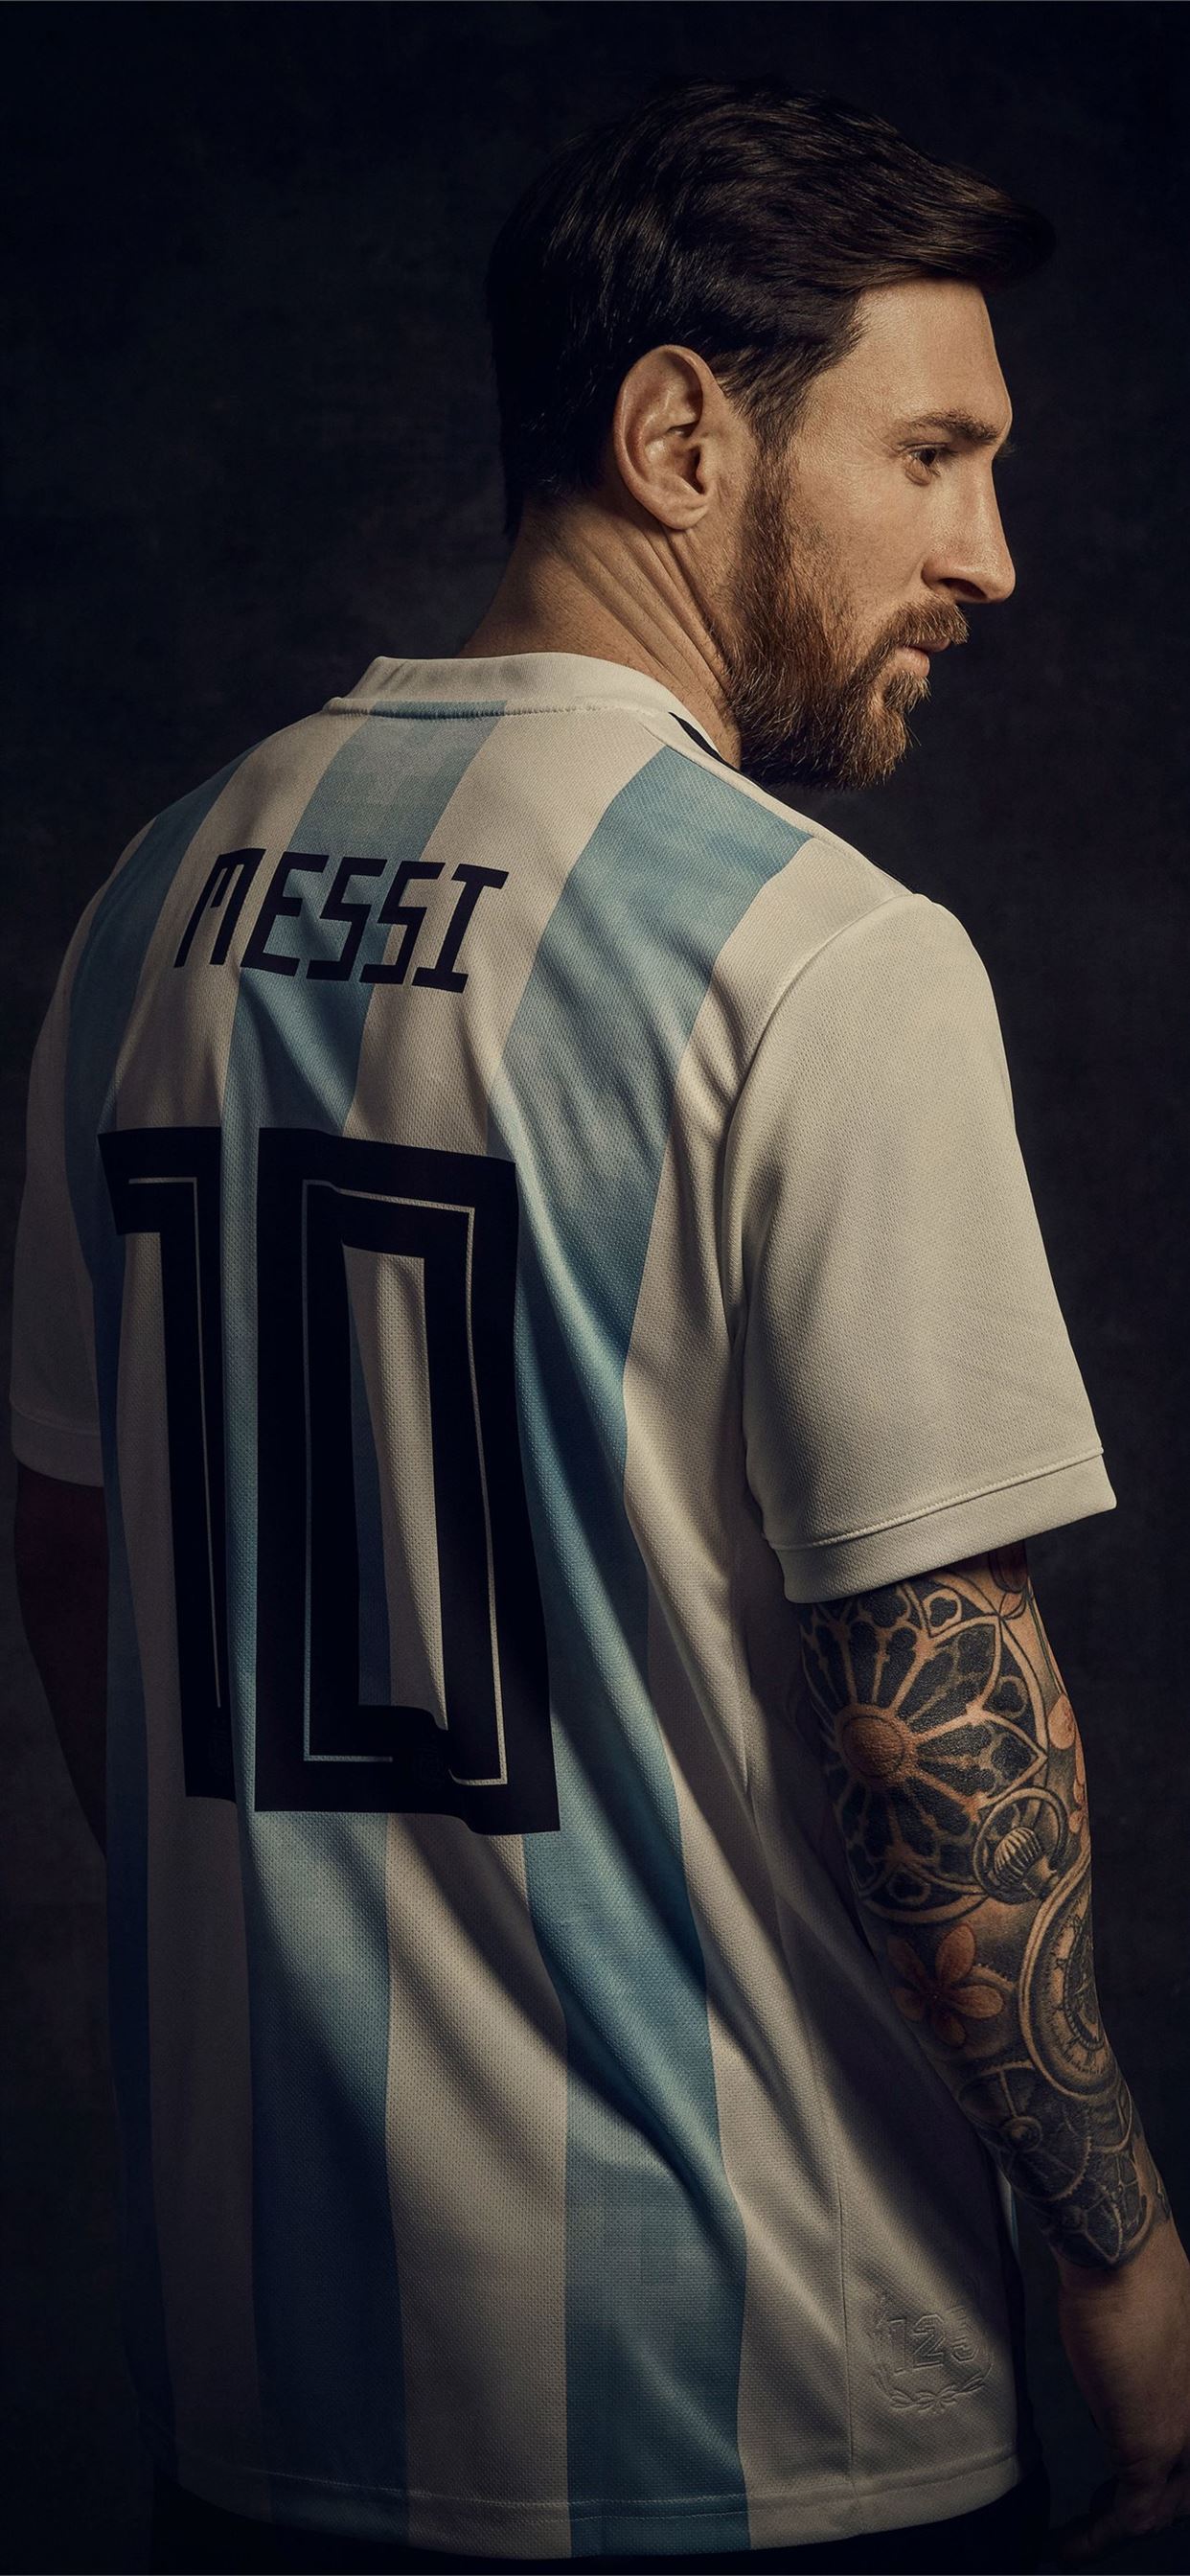 messi hd iPhone Wallpapers Free Download